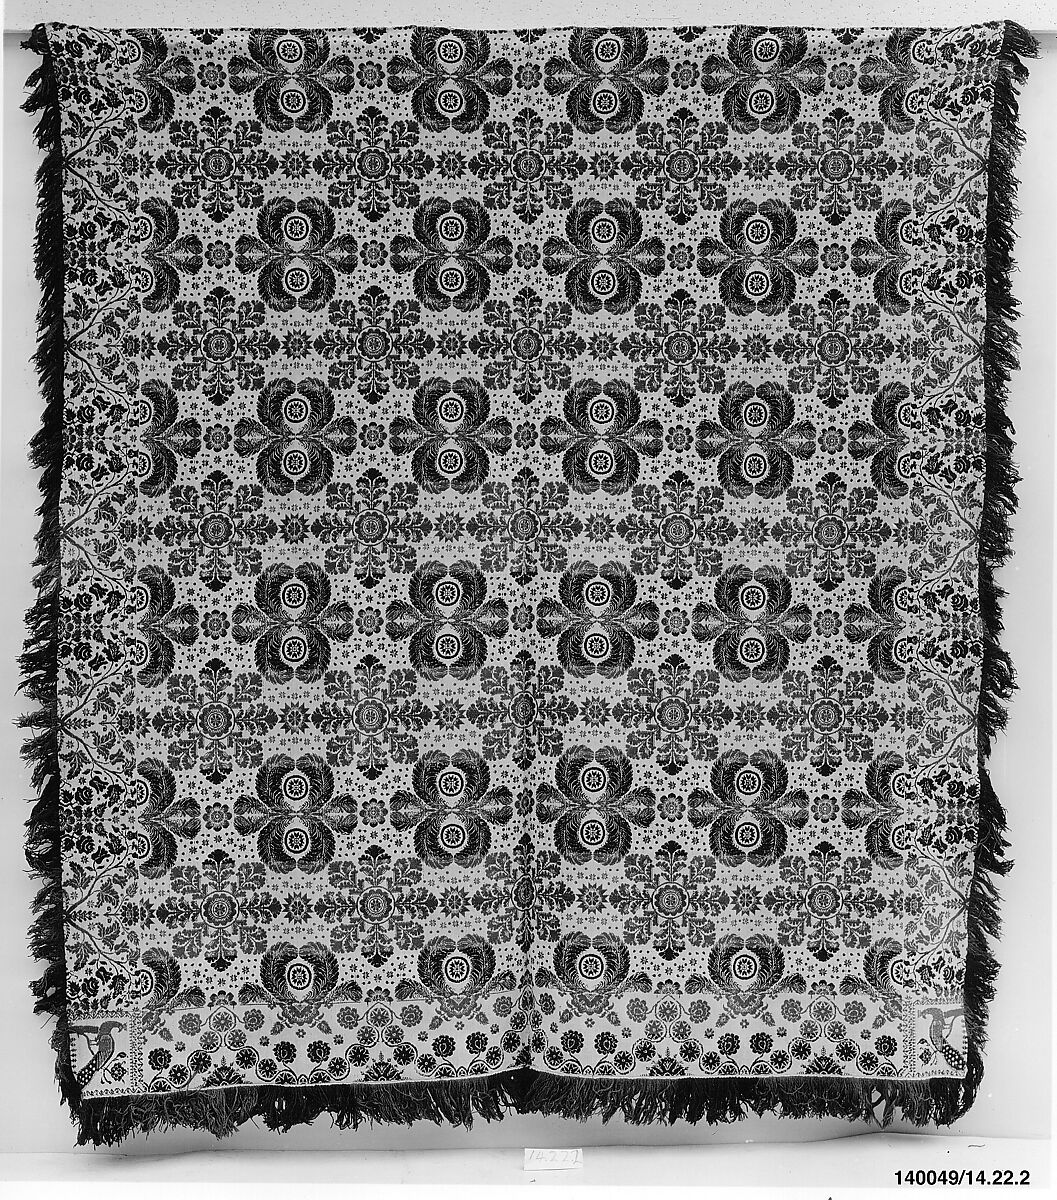 Coverlet, Wool and cotton, Biederwand weave, woven on a hand loom with a Jacquard attachment, American 